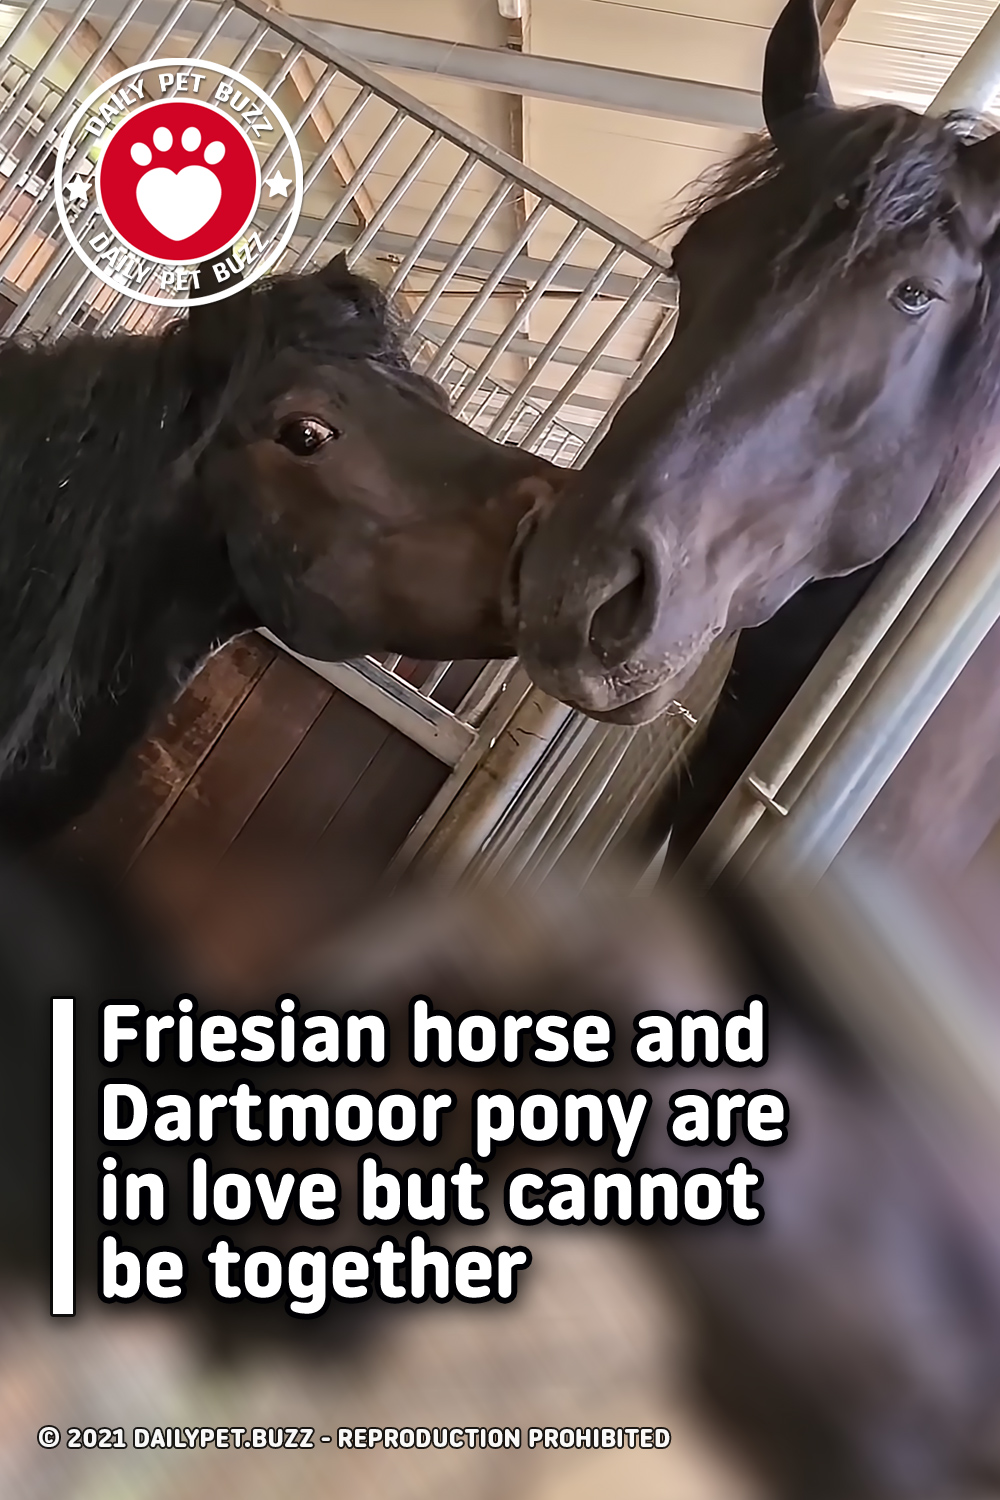 Friesian horse and Dartmoor pony are in love but cannot be together